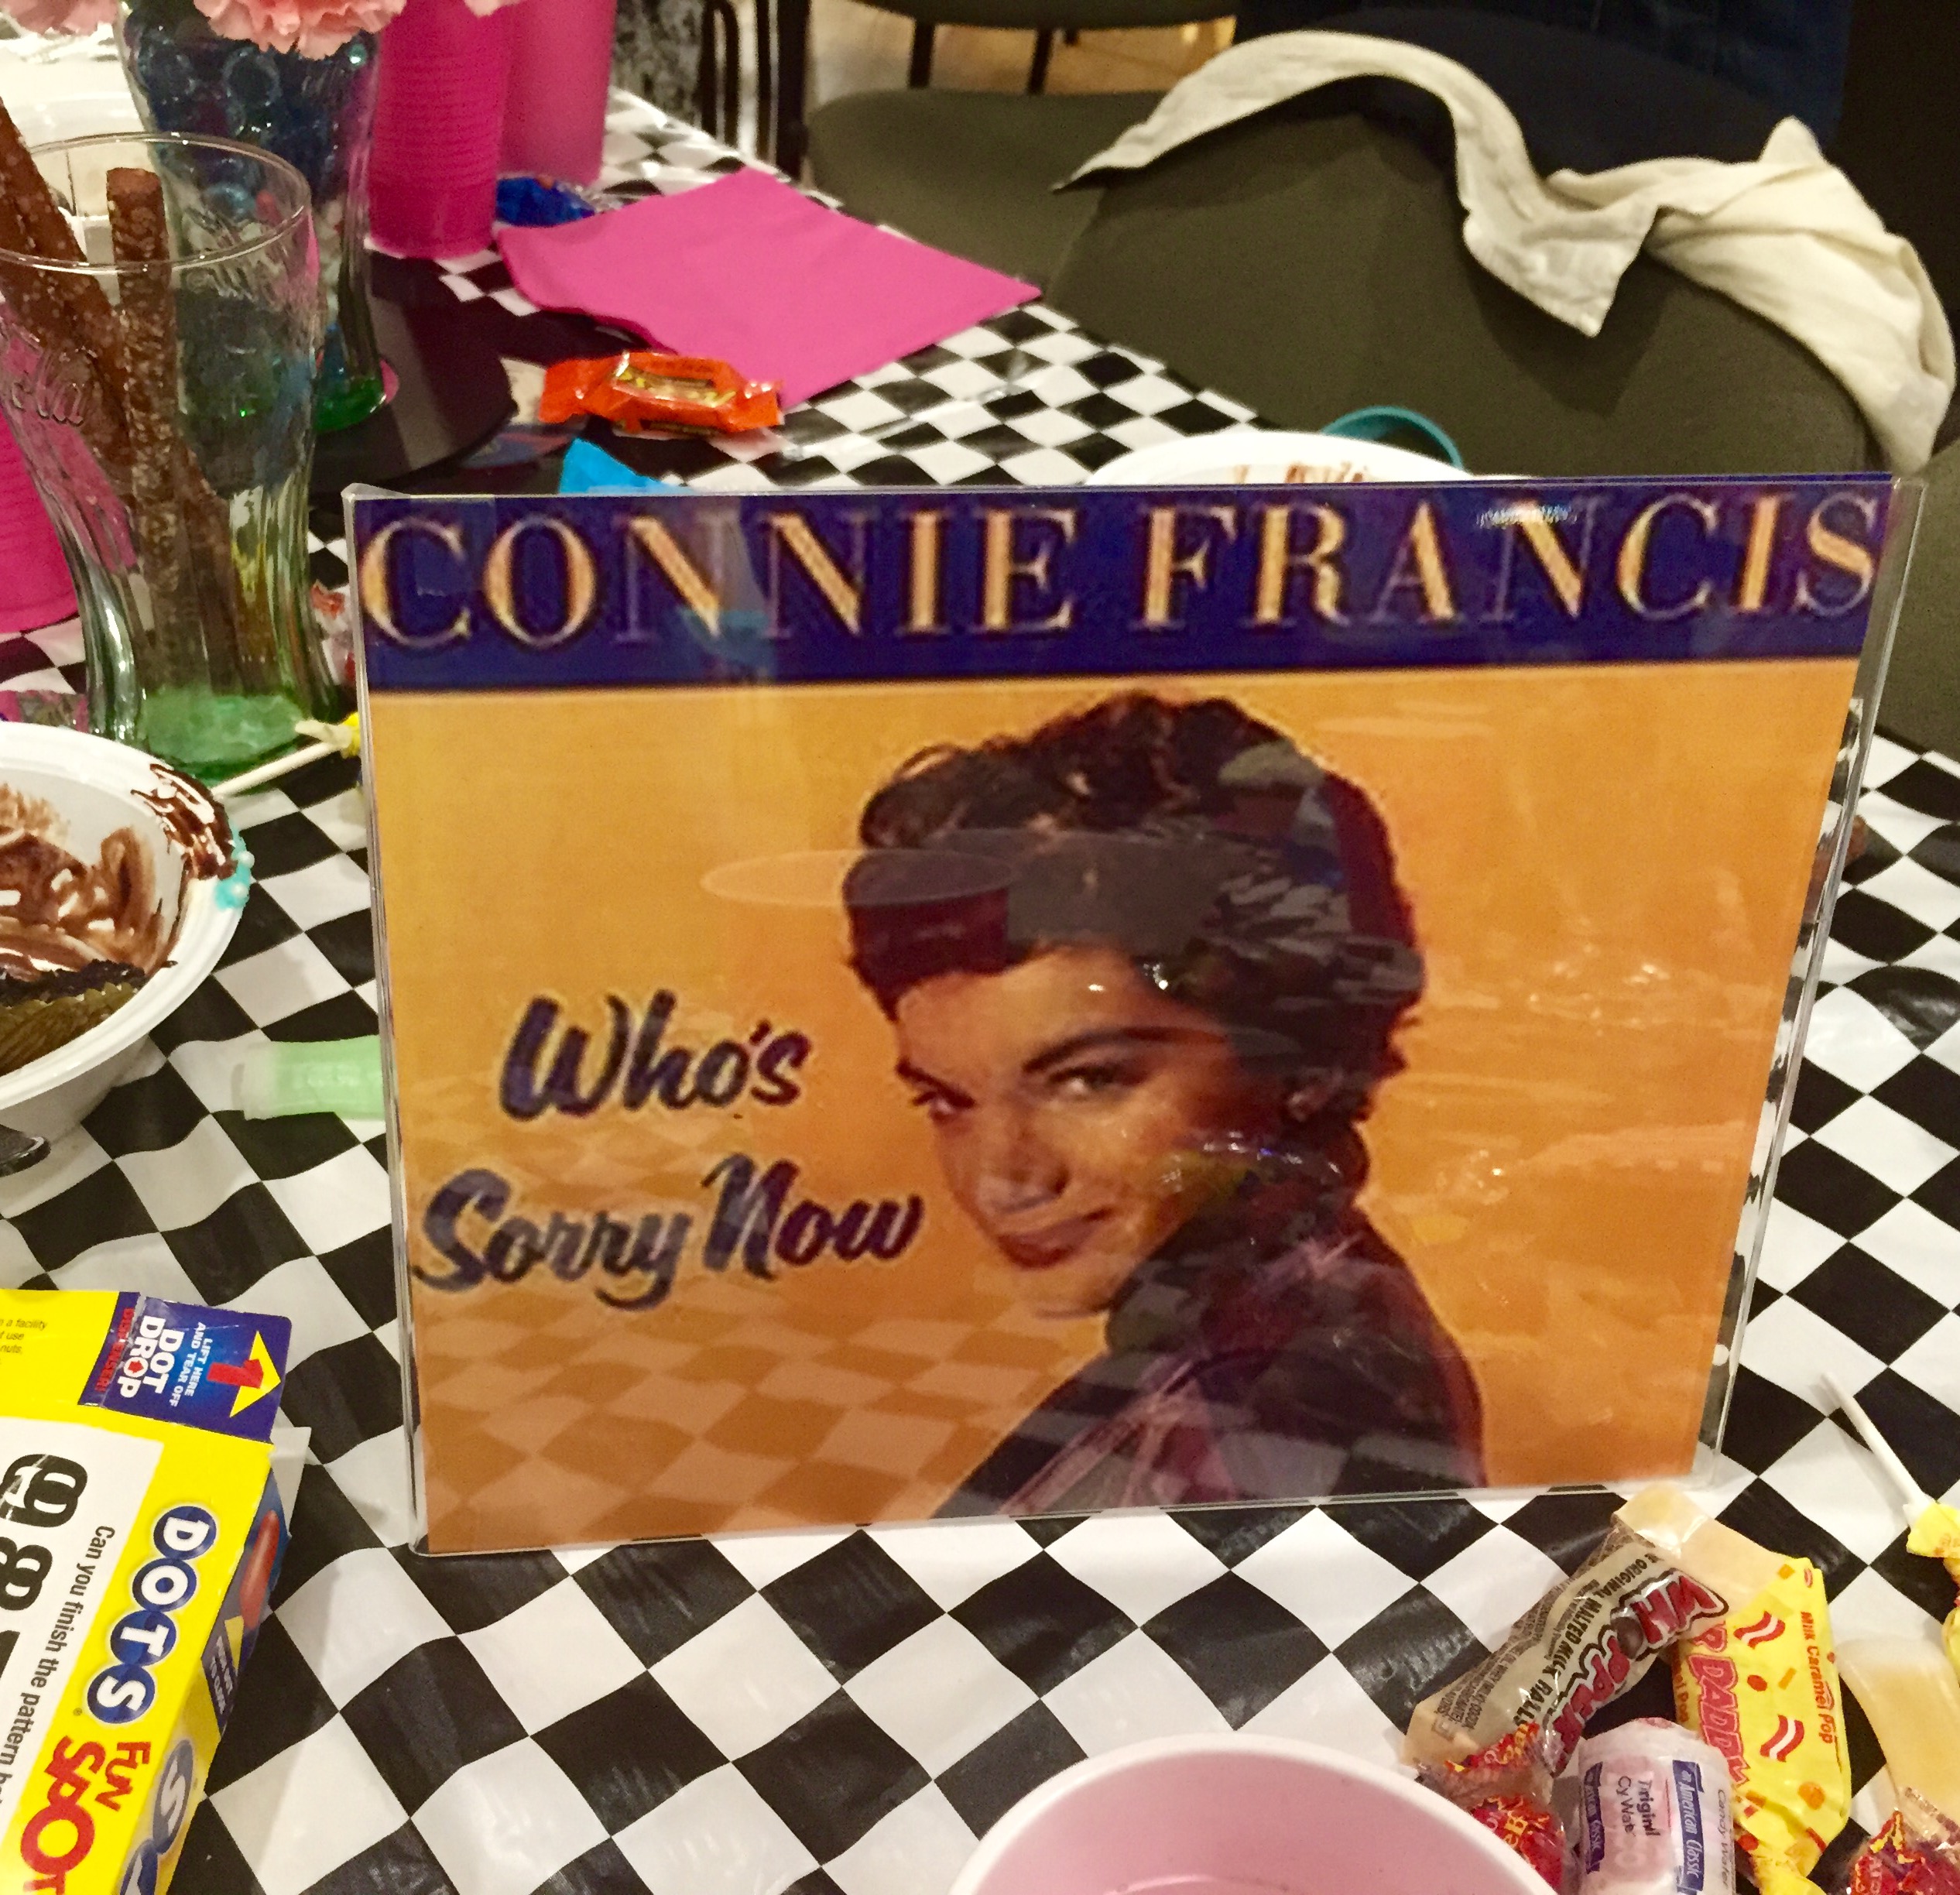 We were seated at the Connie Francis table.jpg